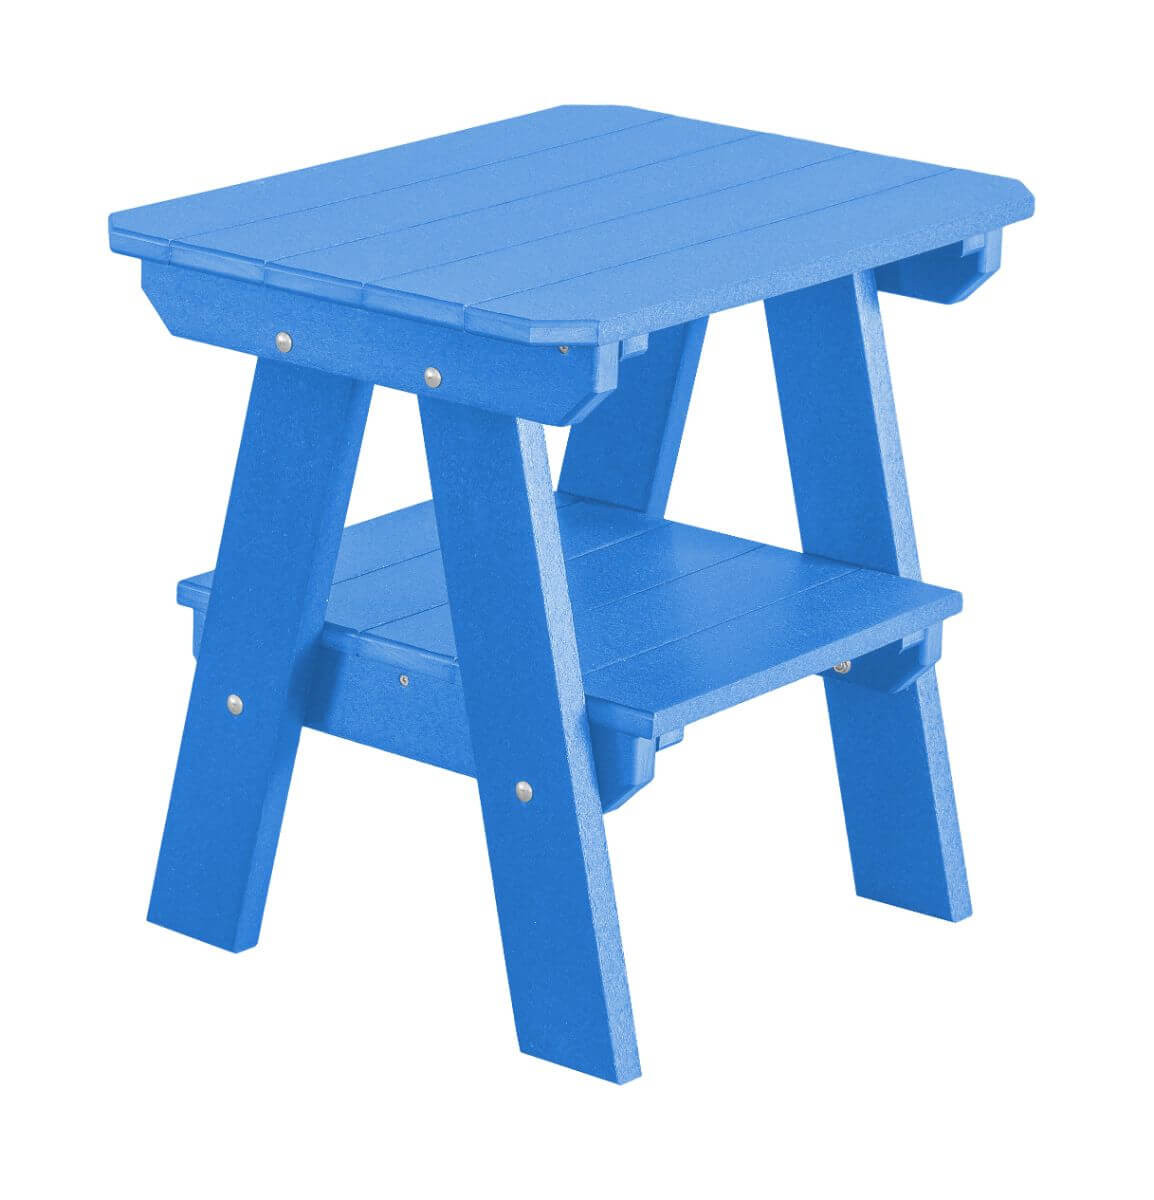 Powder Blue Sidra Outdoor End Table